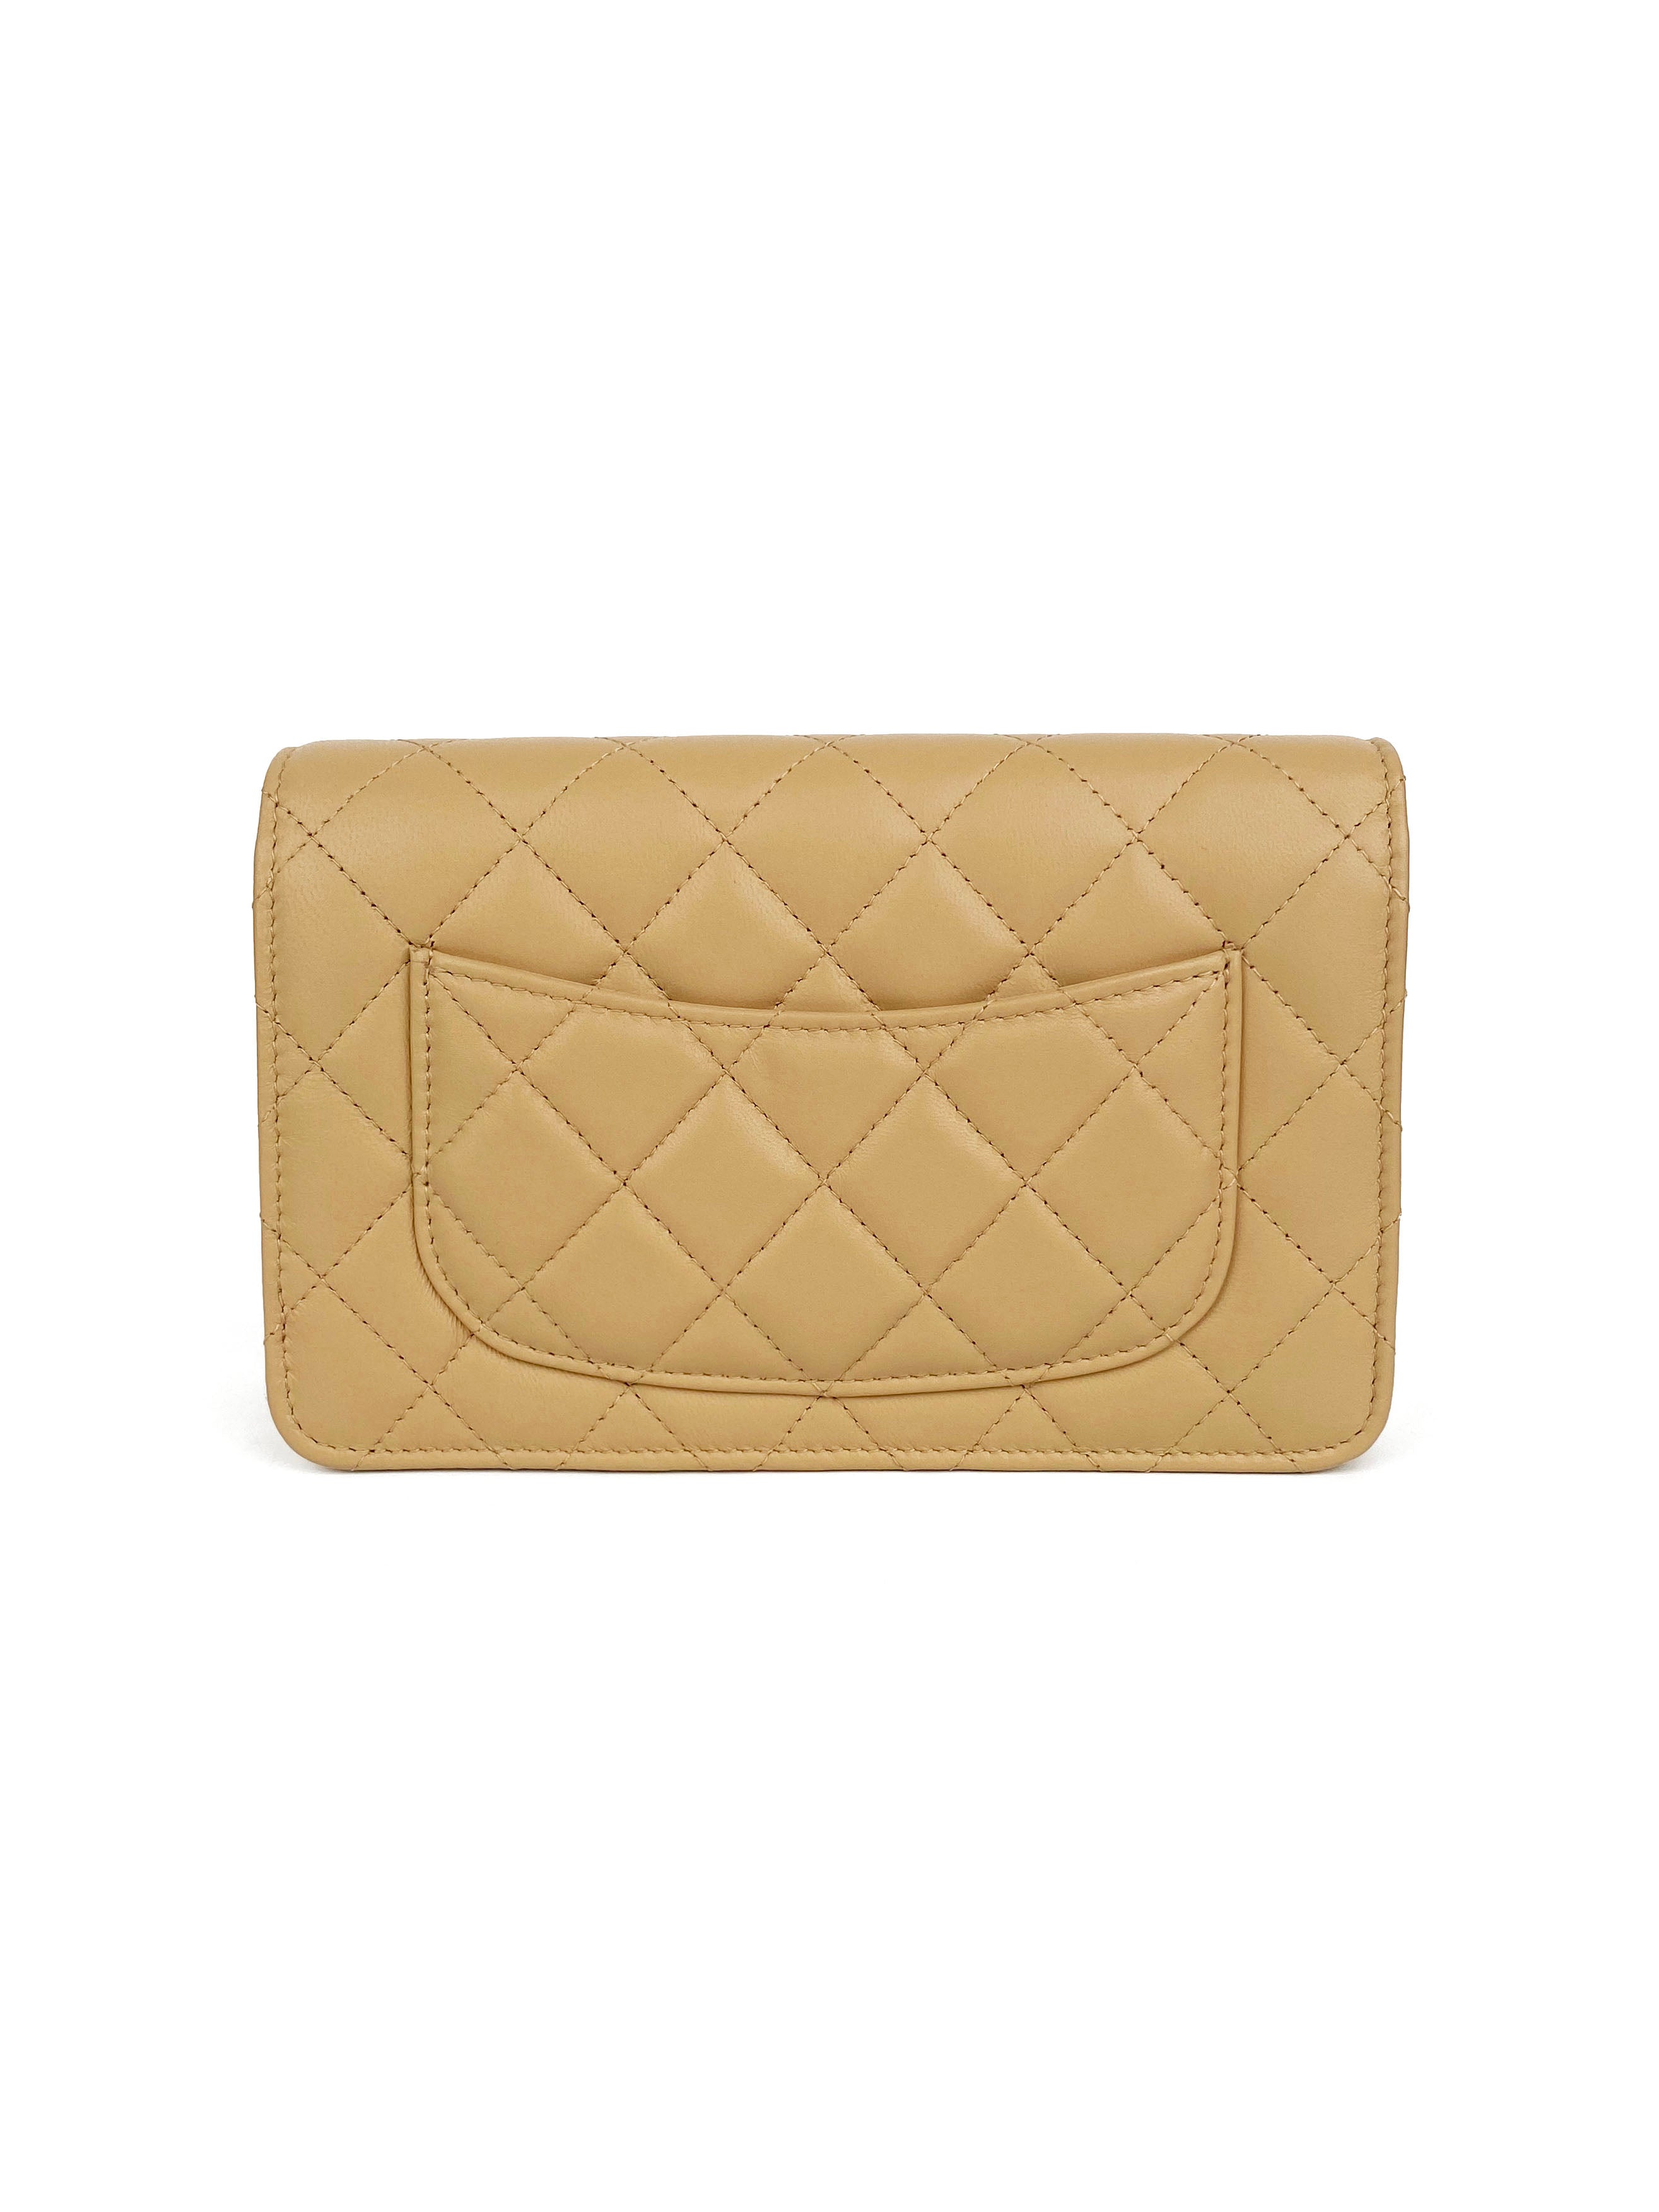 Chanel Beige Wallet on Chain with Pearl Crush